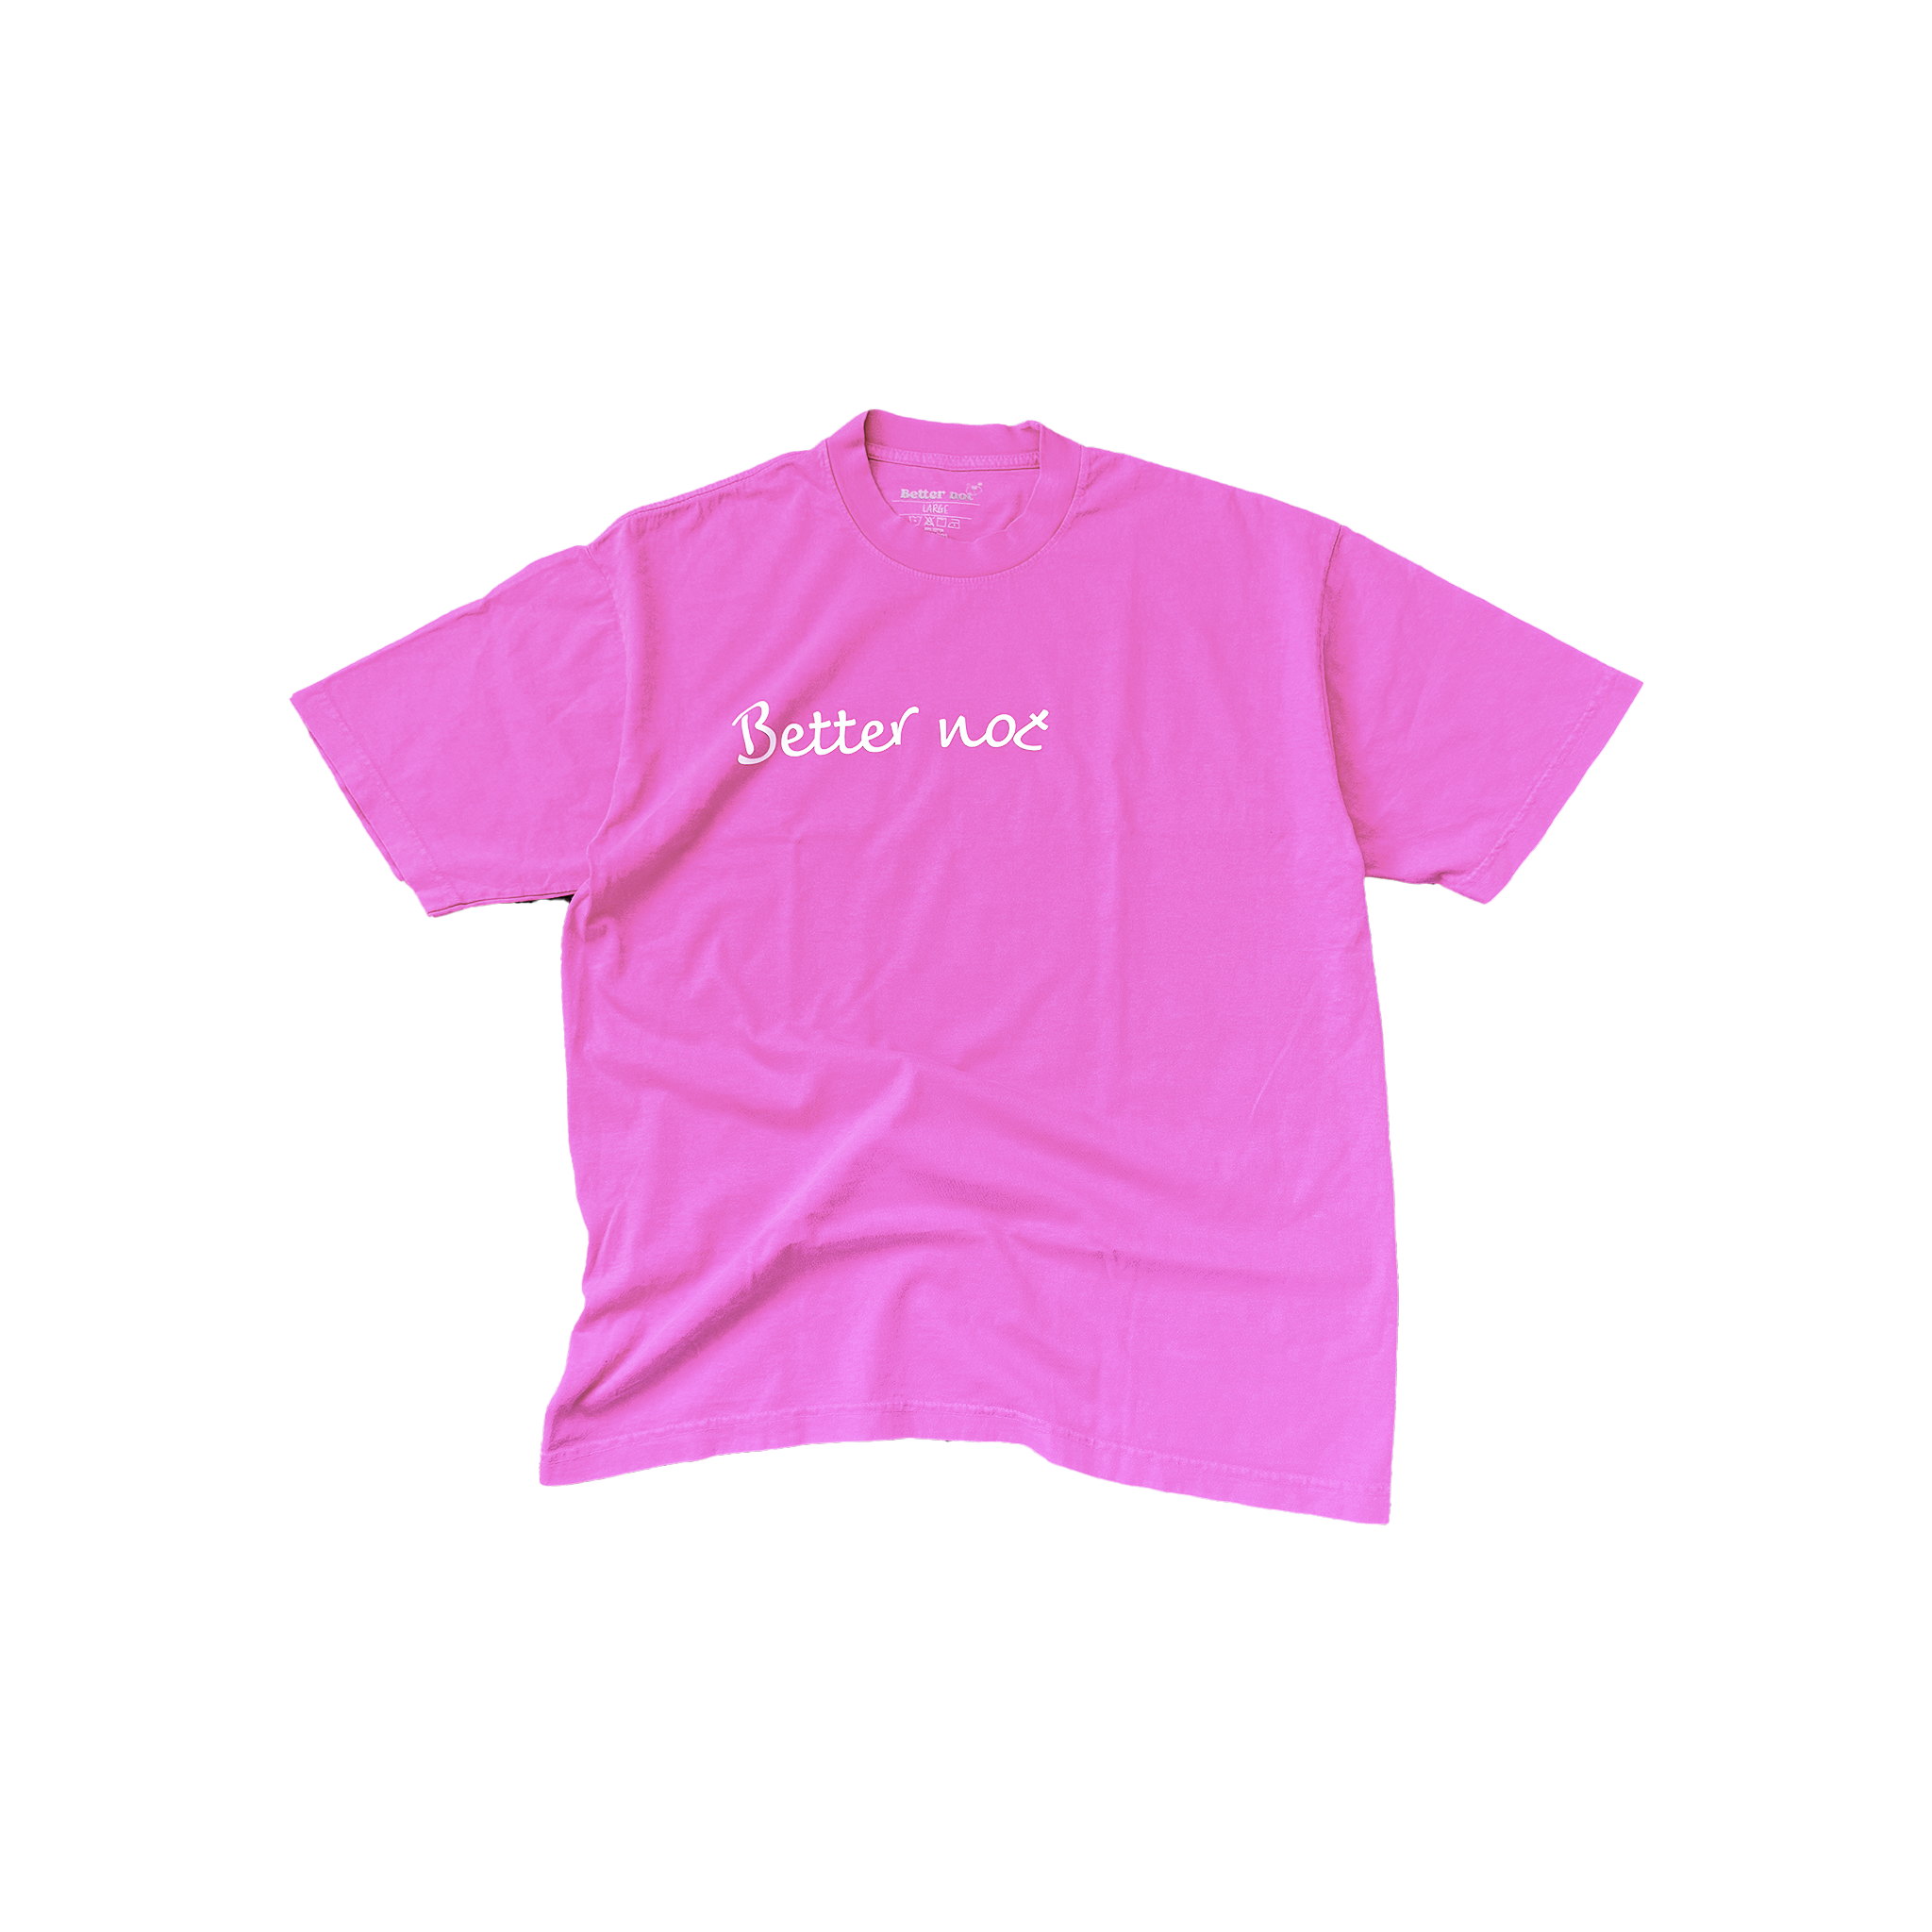 A pink unisex Off-Centered Tee with white text on it by Better not.